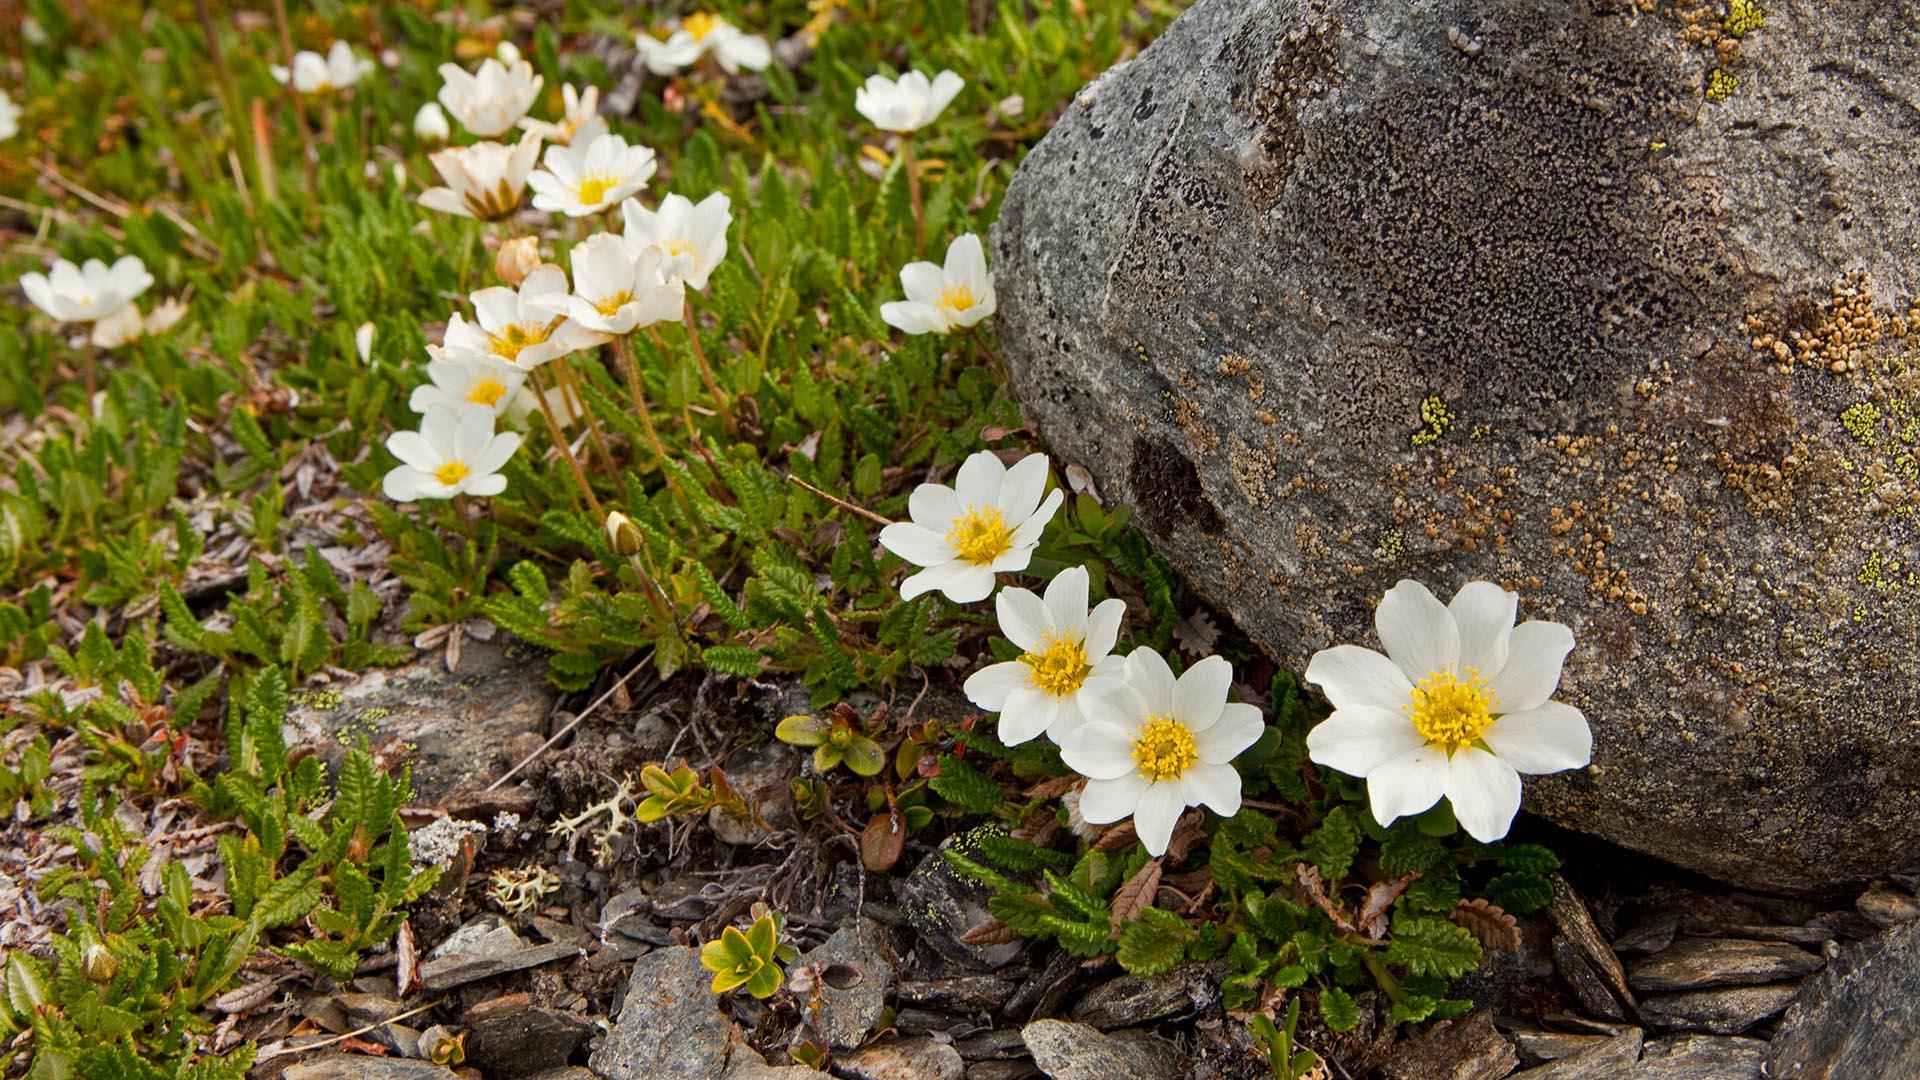 Several Dryas octopetalas growing besides a small rock.